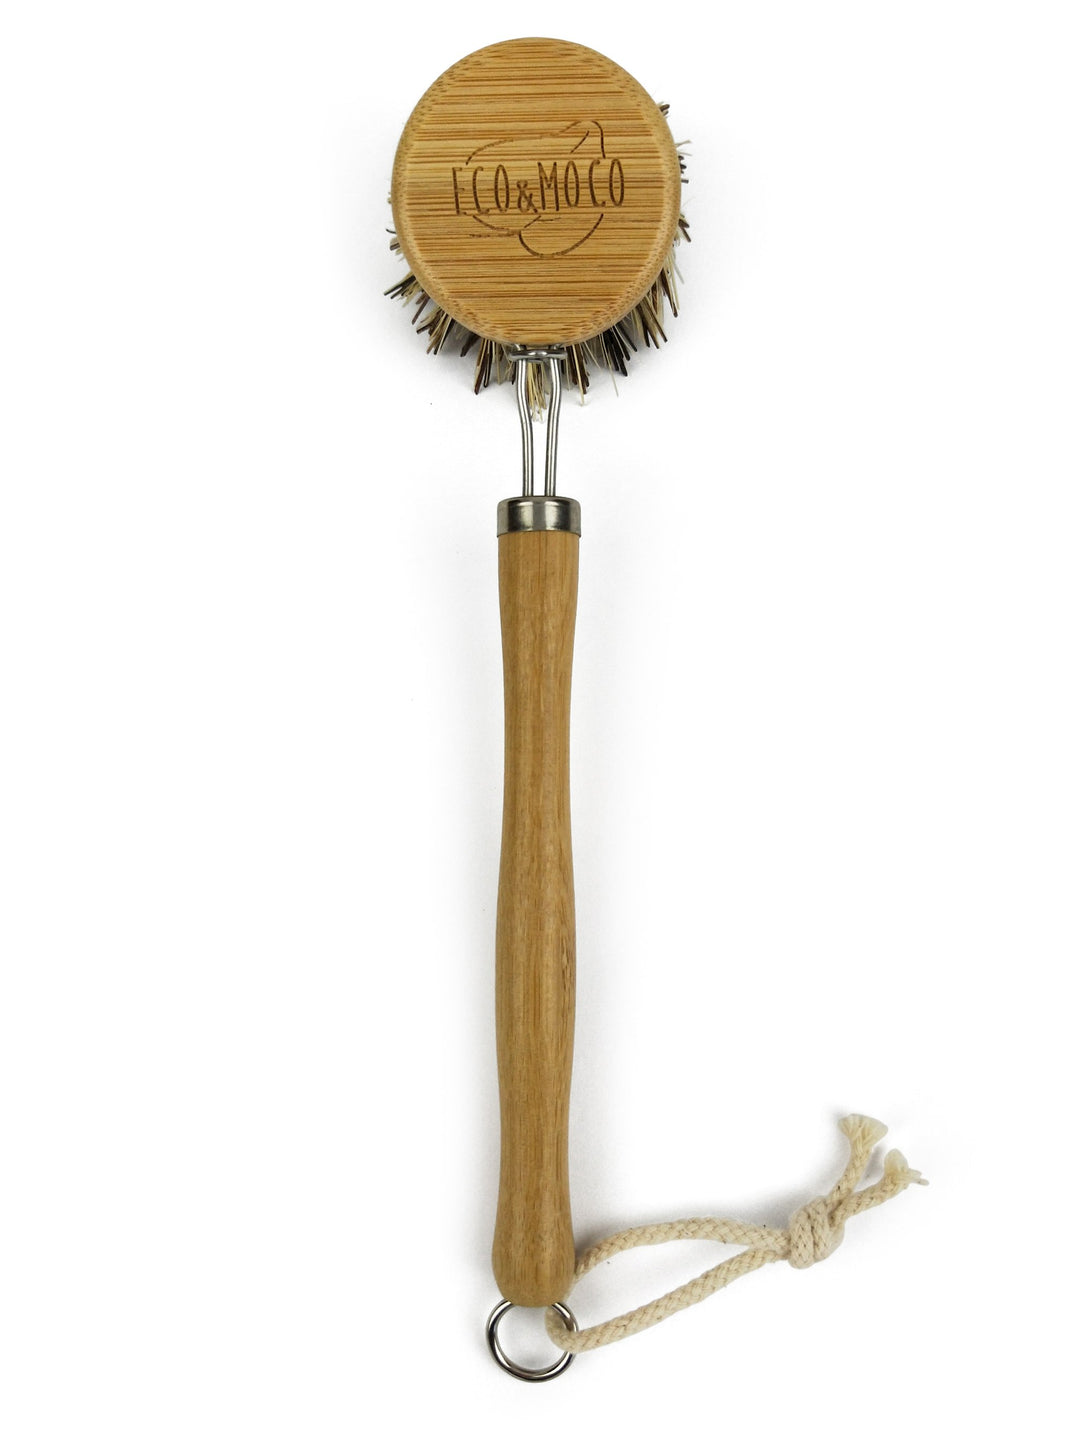 Dish Brush from Eco and Moco